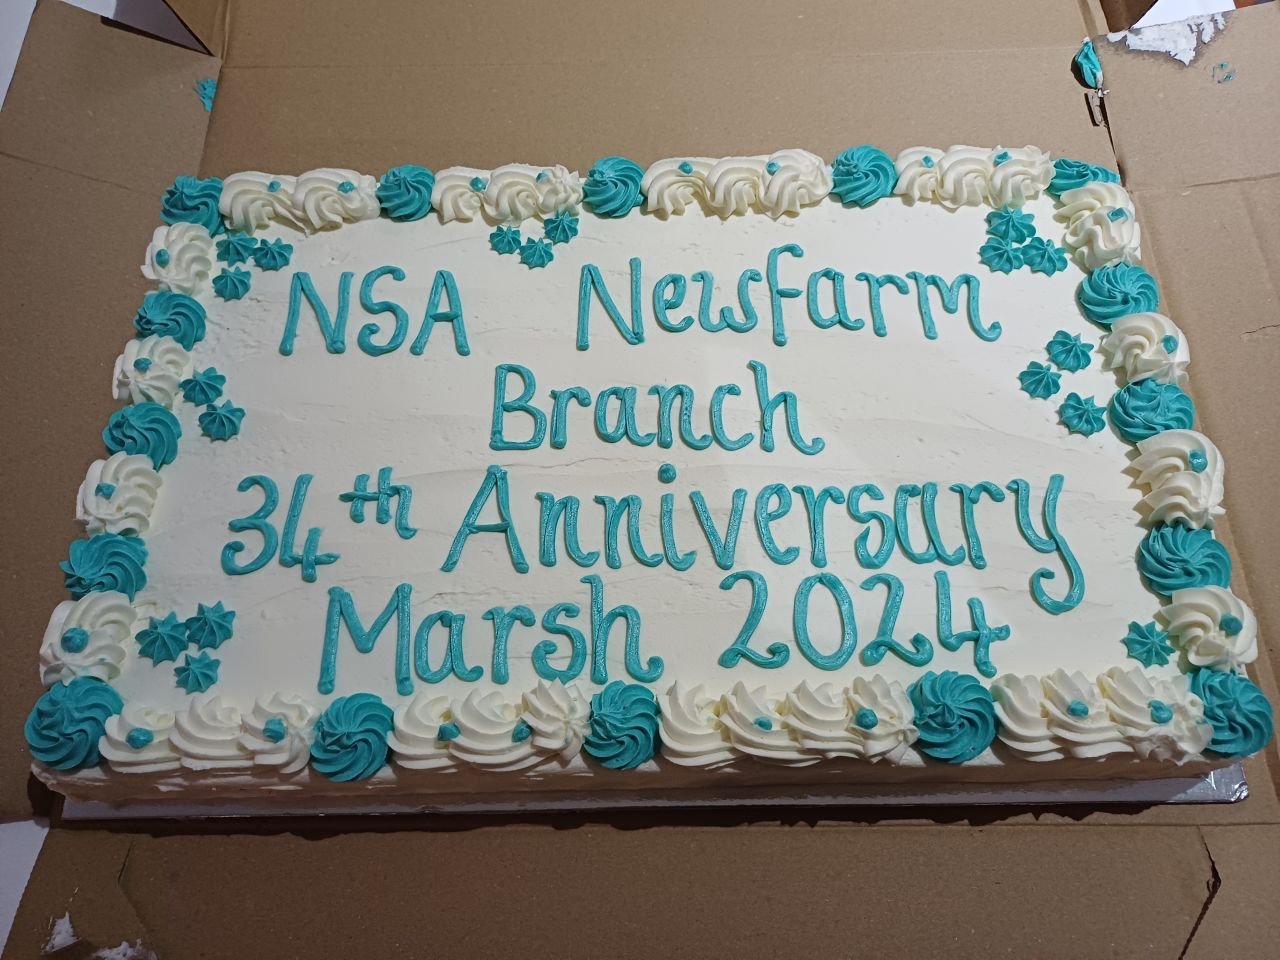 NSA NFB: 
Celebrating our 34th Anniversary, March (?) 2024. Our thanks to Grace Grace for donating the cake from Bakeology.